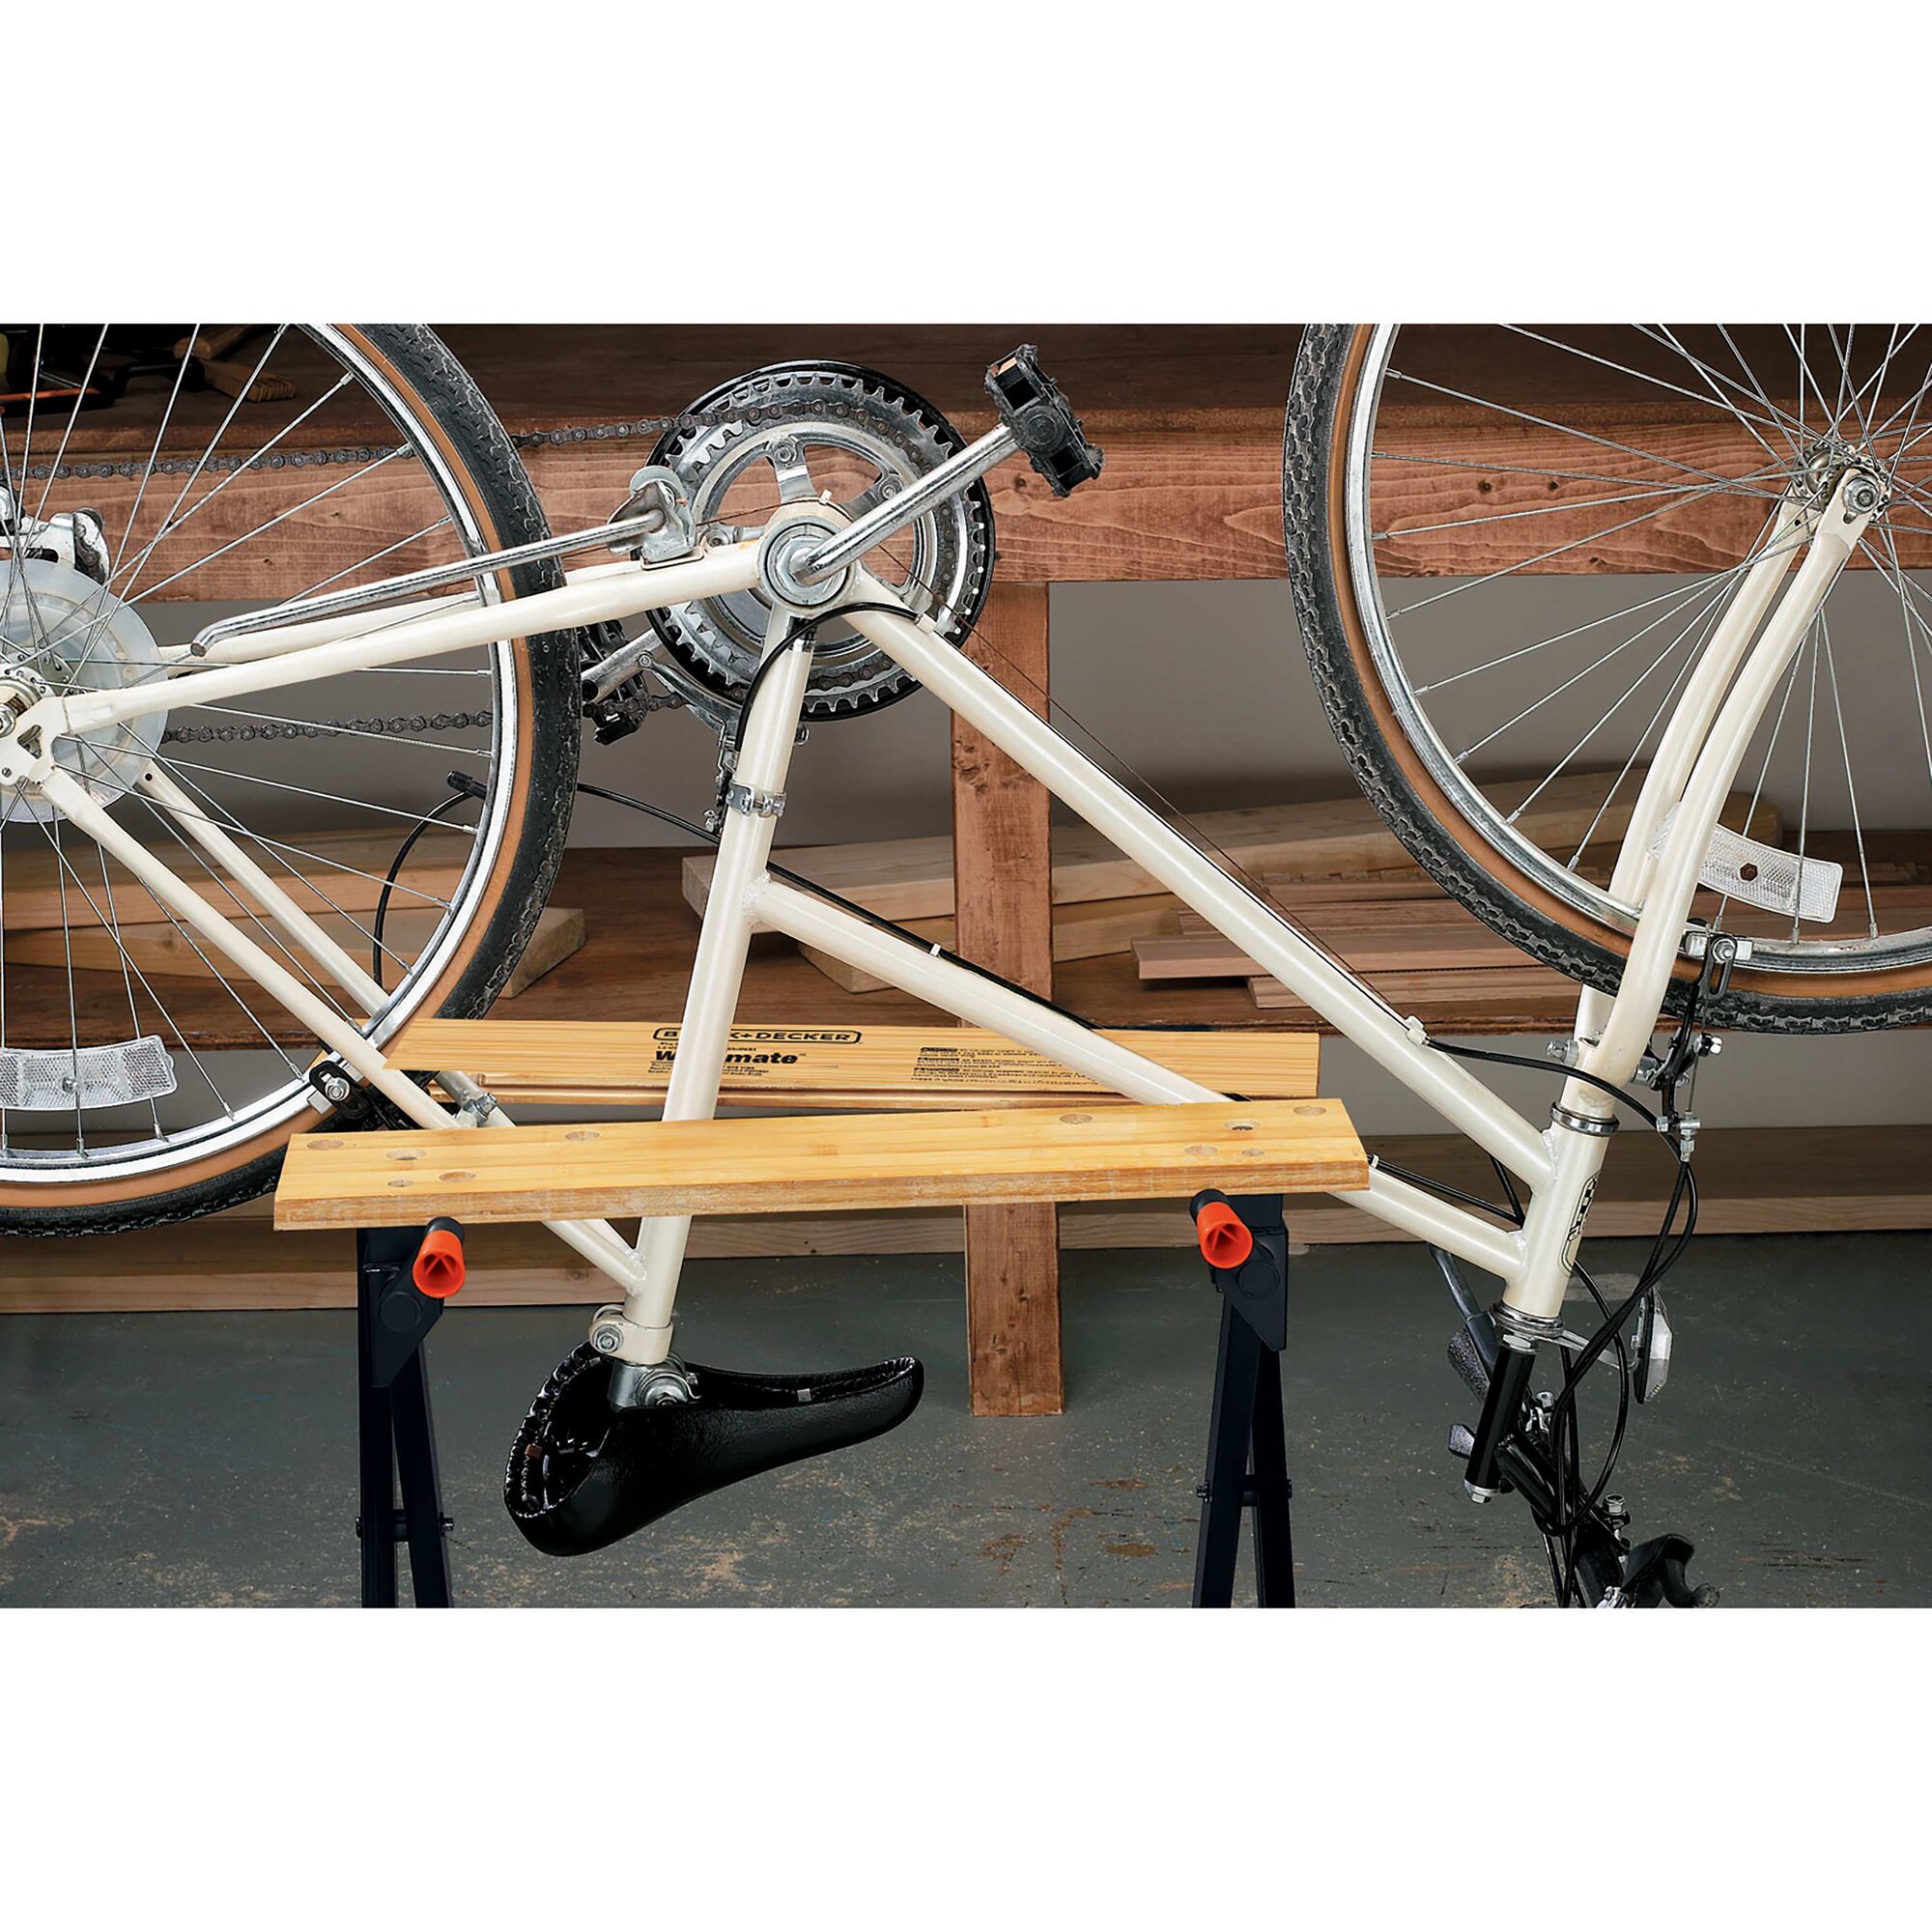 Workmate Portable Project Center and Vise being used to hold an upside down bicycle for repair.